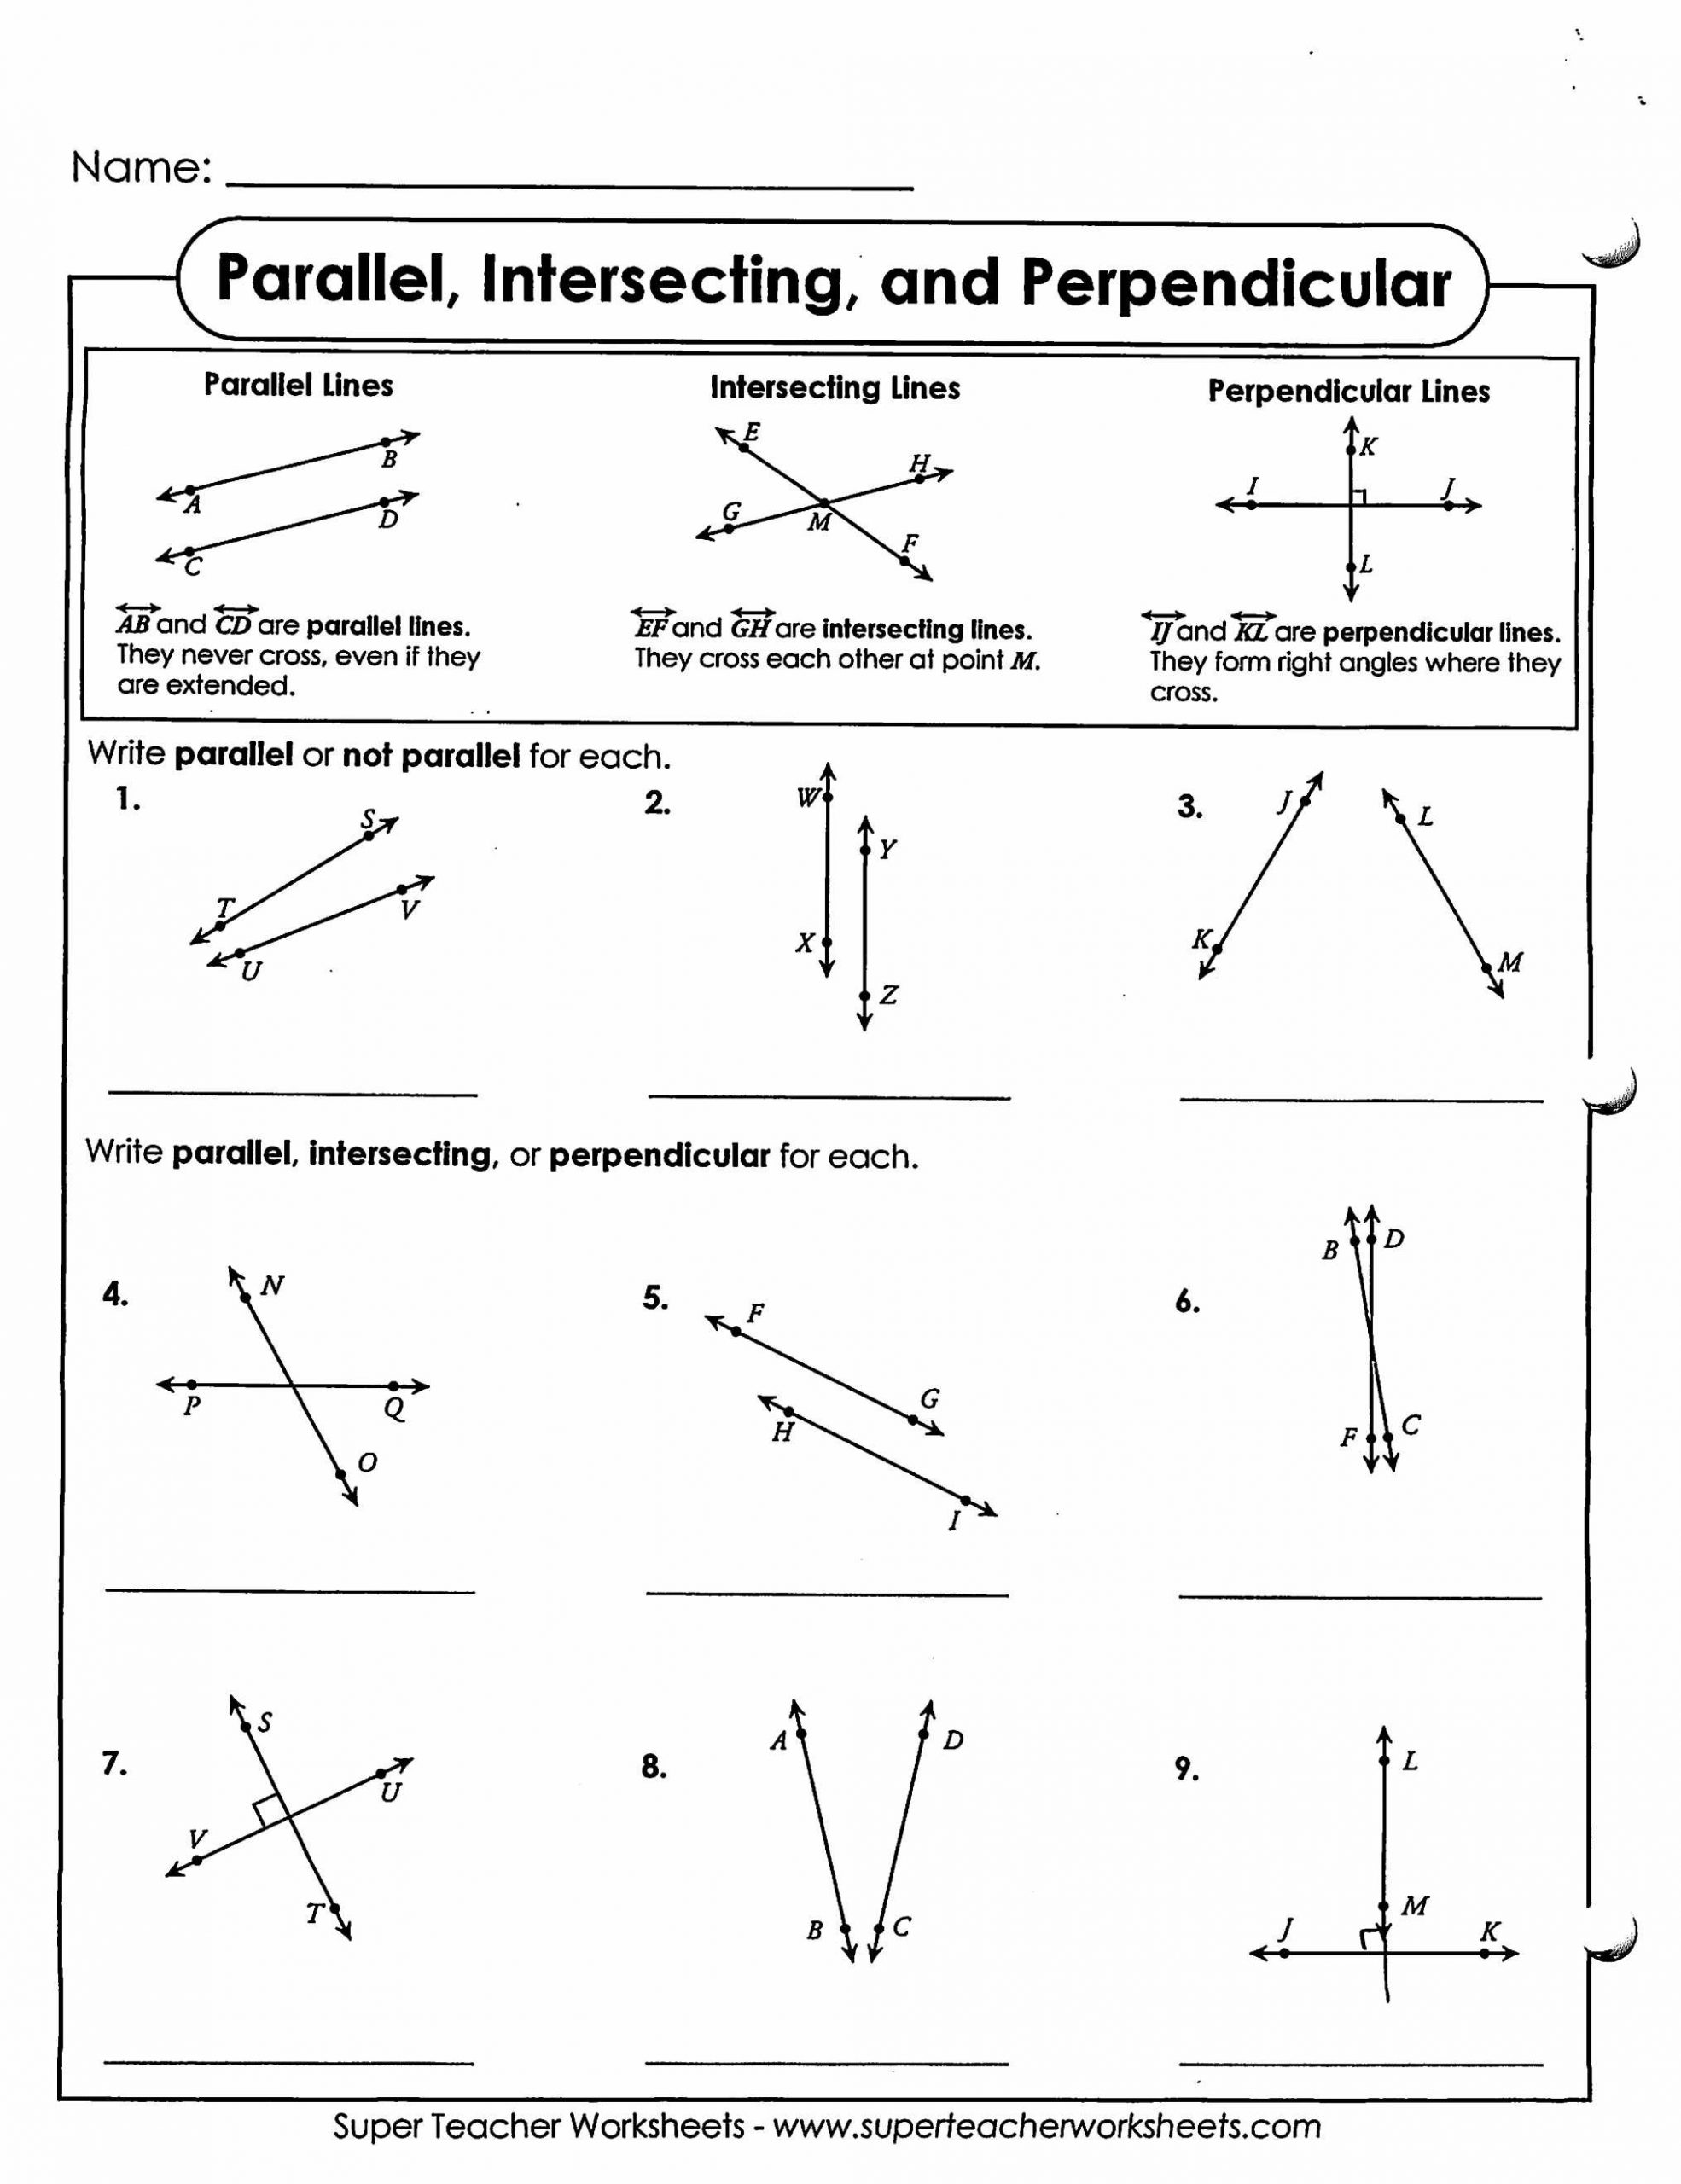 Proving Lines Parallel Worksheet Unique Worksheet Parallel Lines and Transversals Geometry